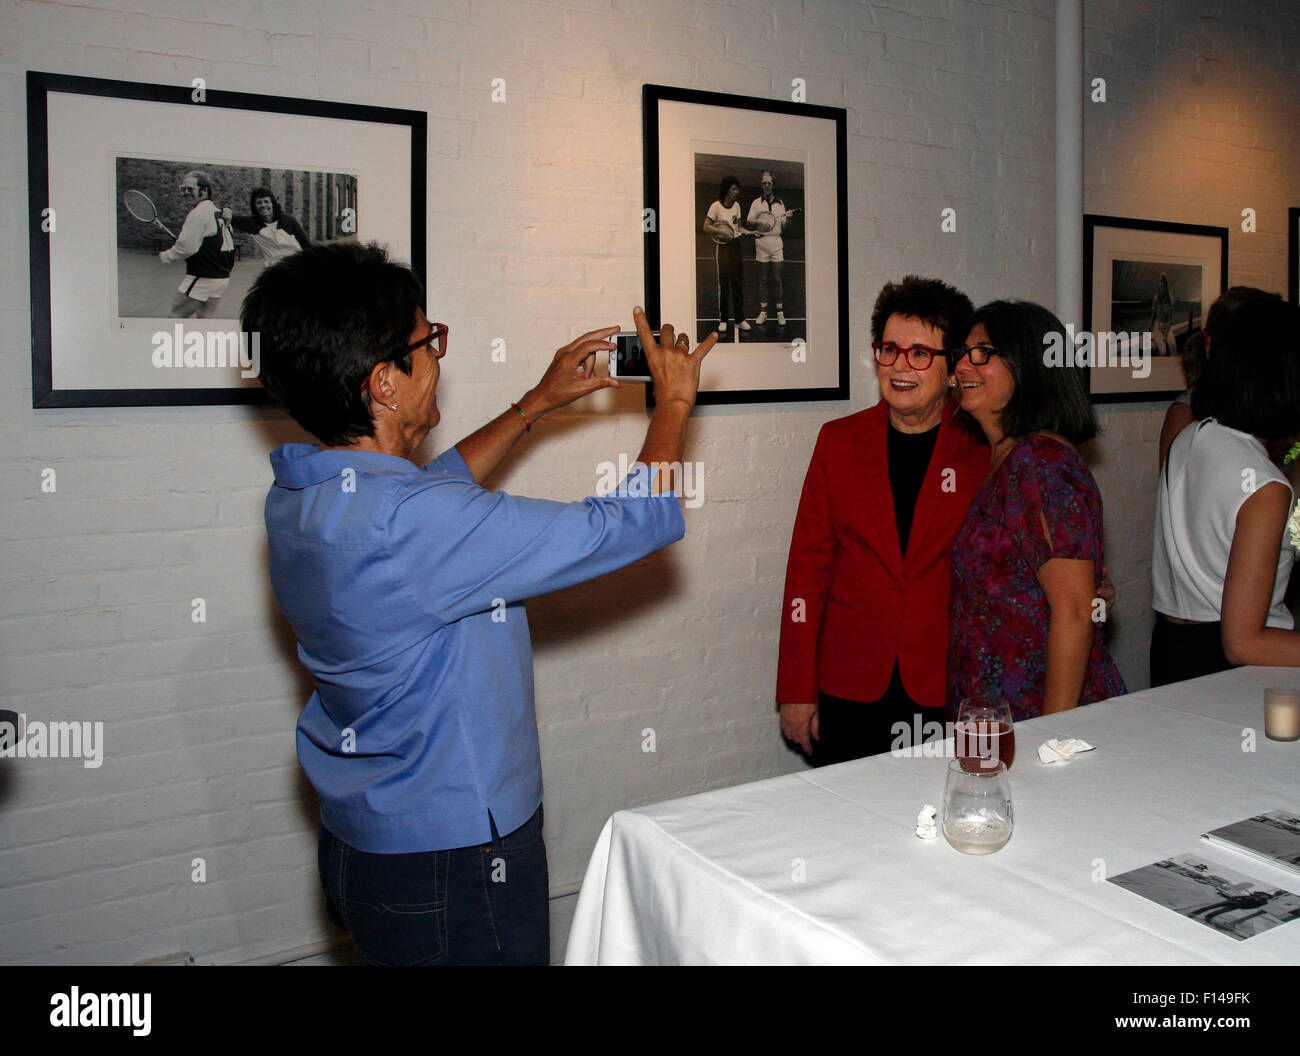 New York, USA. 26th August, 2015. Tennis legend Billie Jean King poses for a photo taken by partner during a reception at New York's Morrison Hotel Gallery in Soho on August 27th, 2015. The event sponsored by Citibank was to promote a show and book by O'Neil who photographed King and other celebrities extensively in the 1970's and 80's.  On the wall above King are images of her with rock star Elton John which were taken by O'Neil. Credit:  Adam Stoltman/Alamy Live News Stock Photo